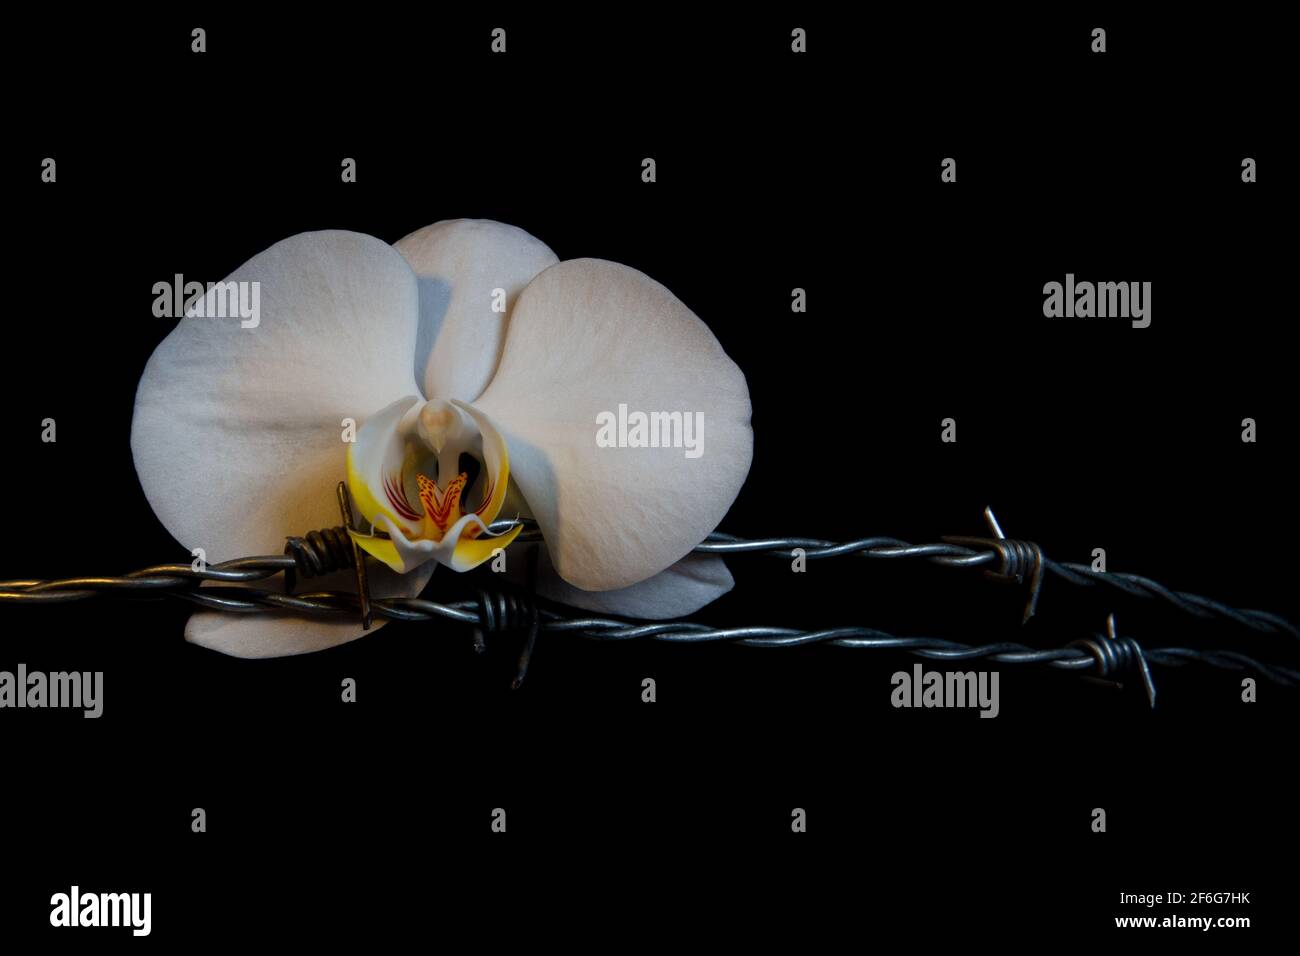 White orchid blossom and barbed wire isolated on black background, concept of femininity and pain Stock Photo